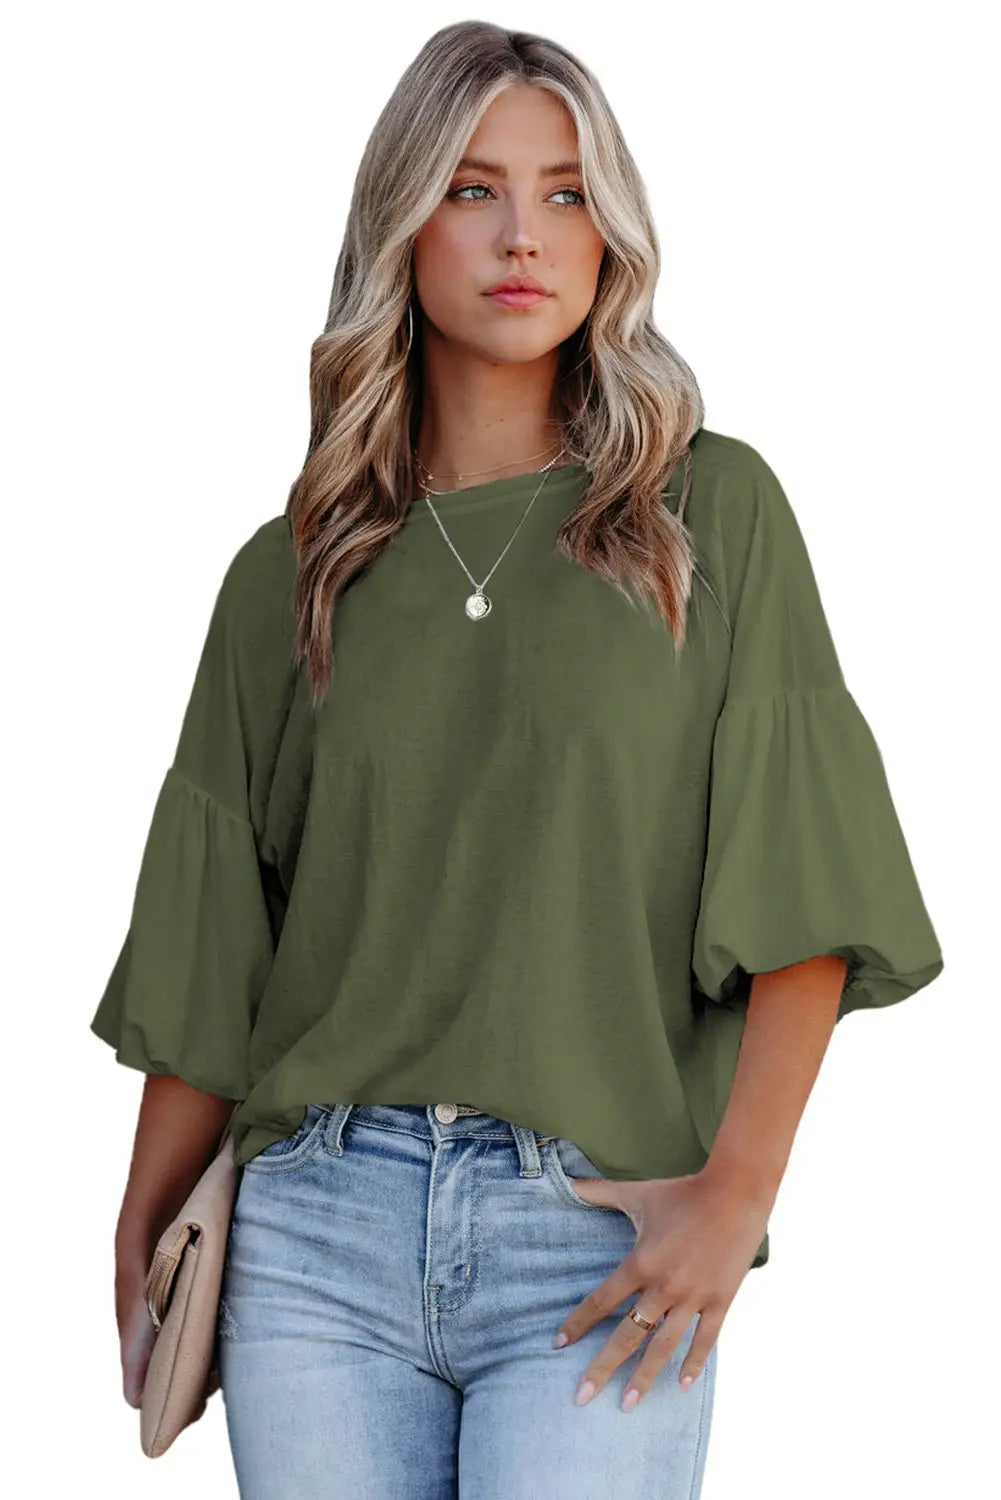 Black joint bubble sleeve round neck blouse - tops